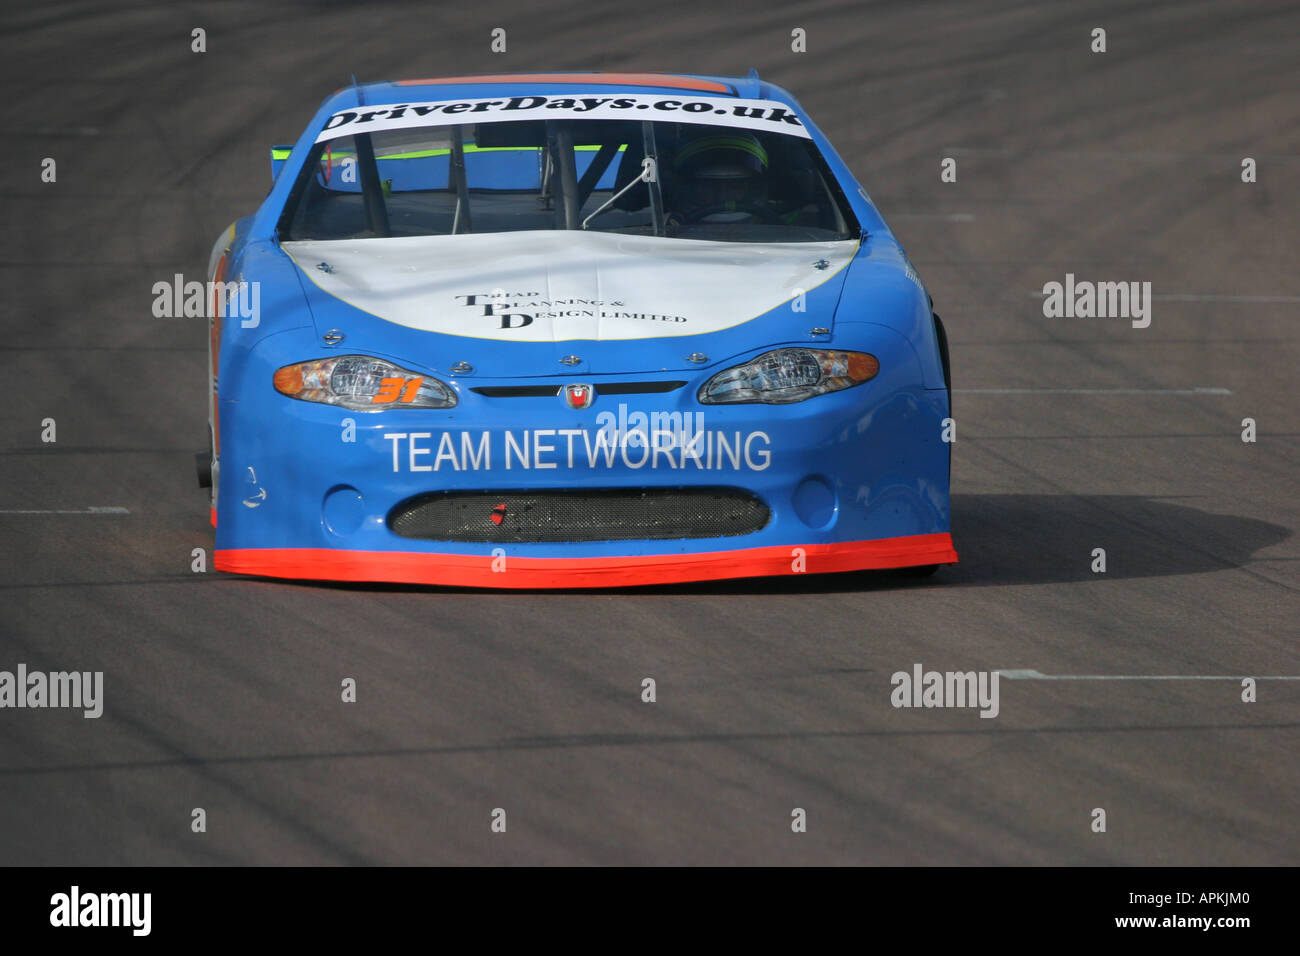 V8 Nascar type stock cars racing on a banked oval circuit Stock Photo